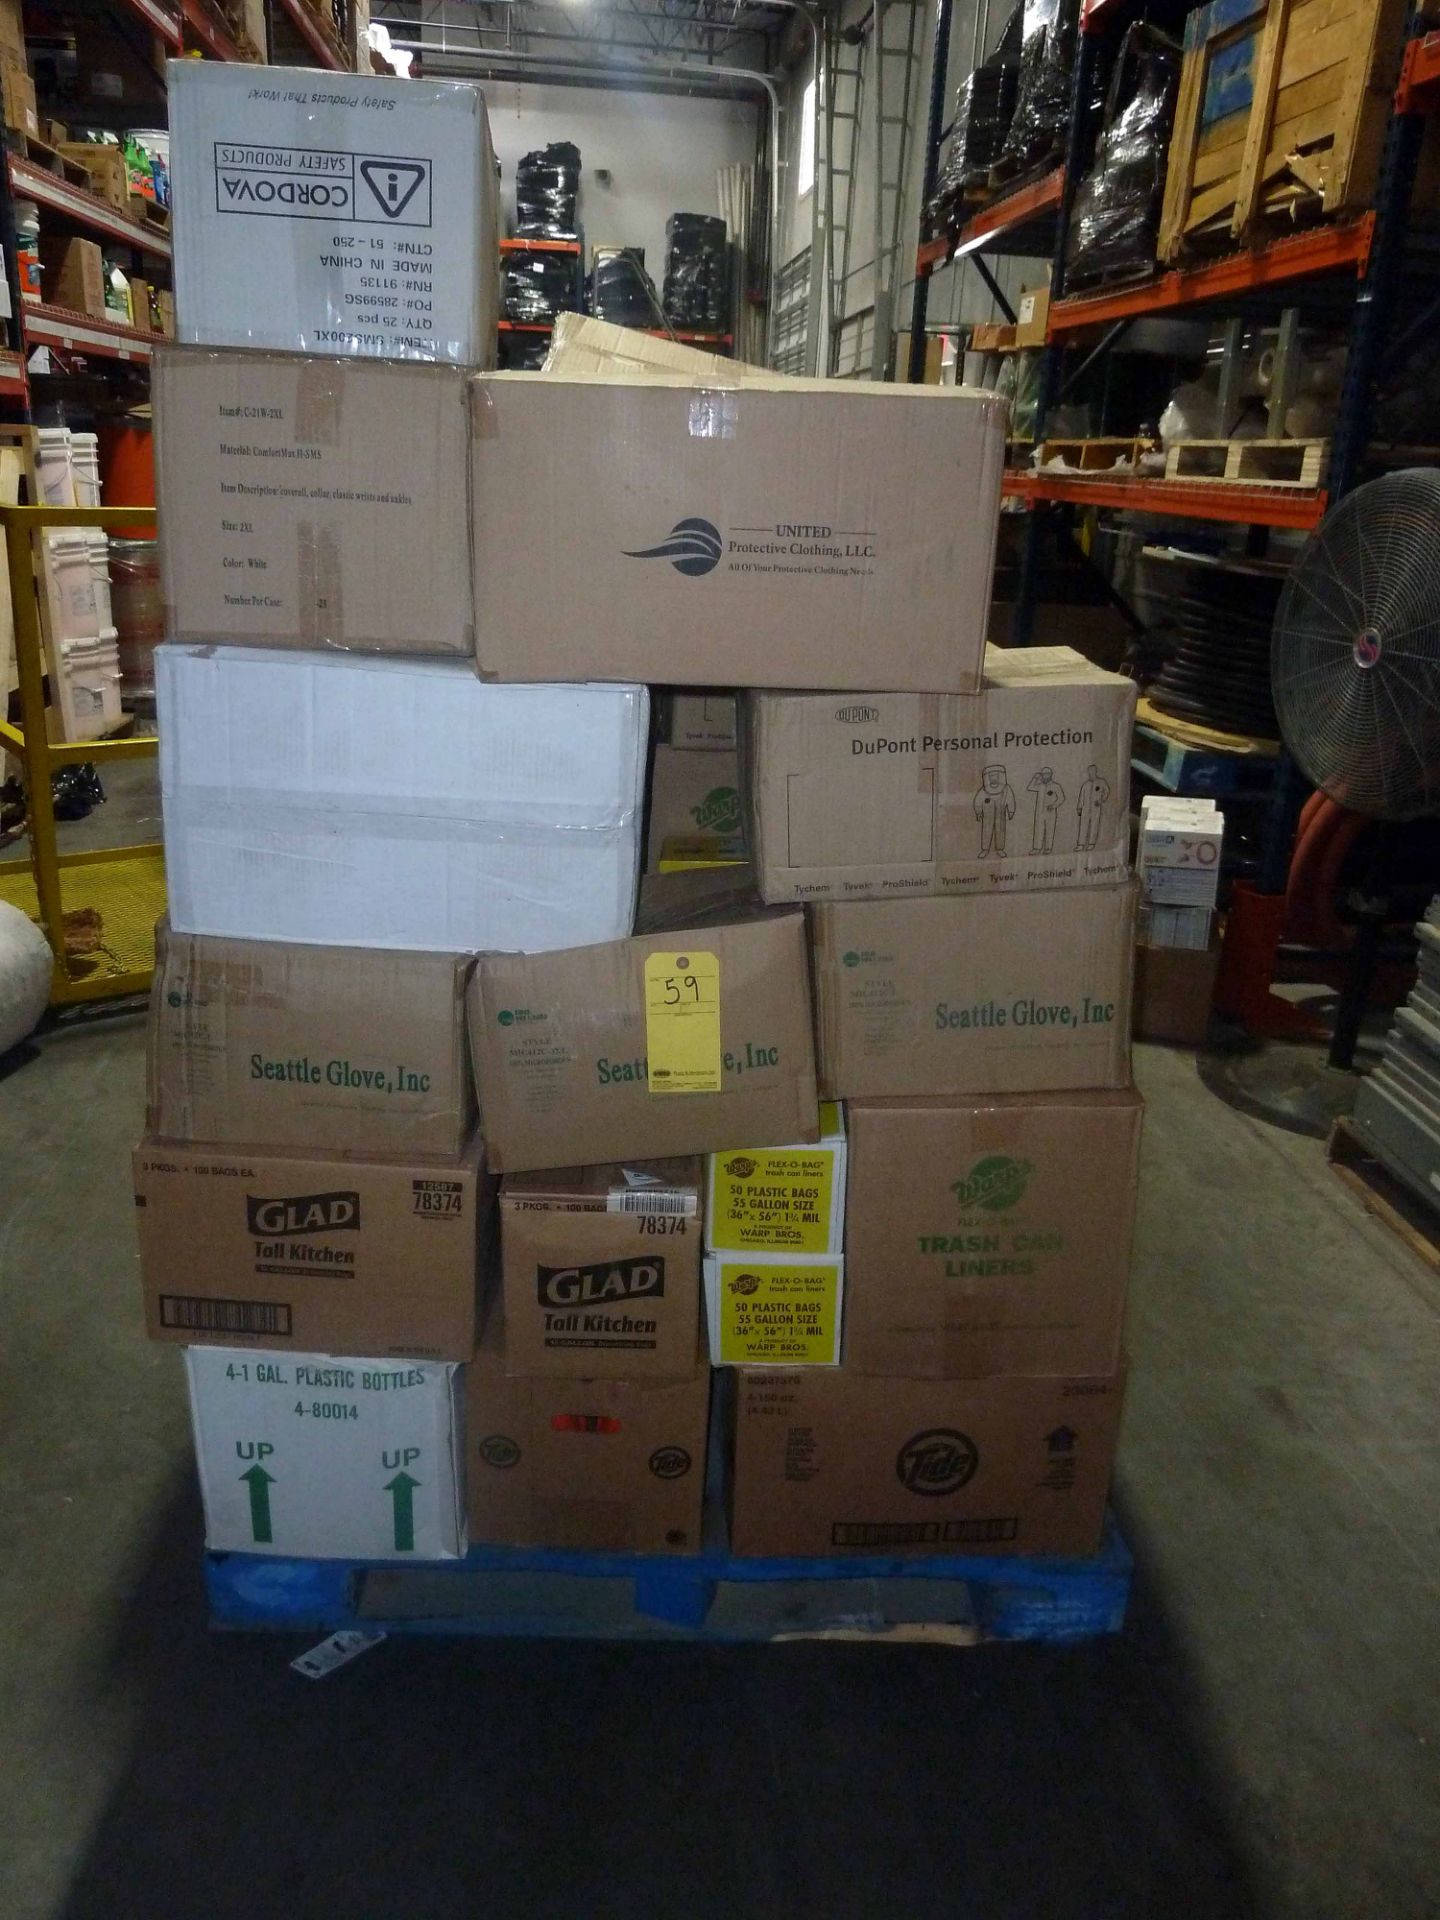 LOT OF CLEANING SUPPLIES: Tyvek suits, trash bags, Lysol, GoJo, bleach, Sud-Ur-Duds  LOCATED IN